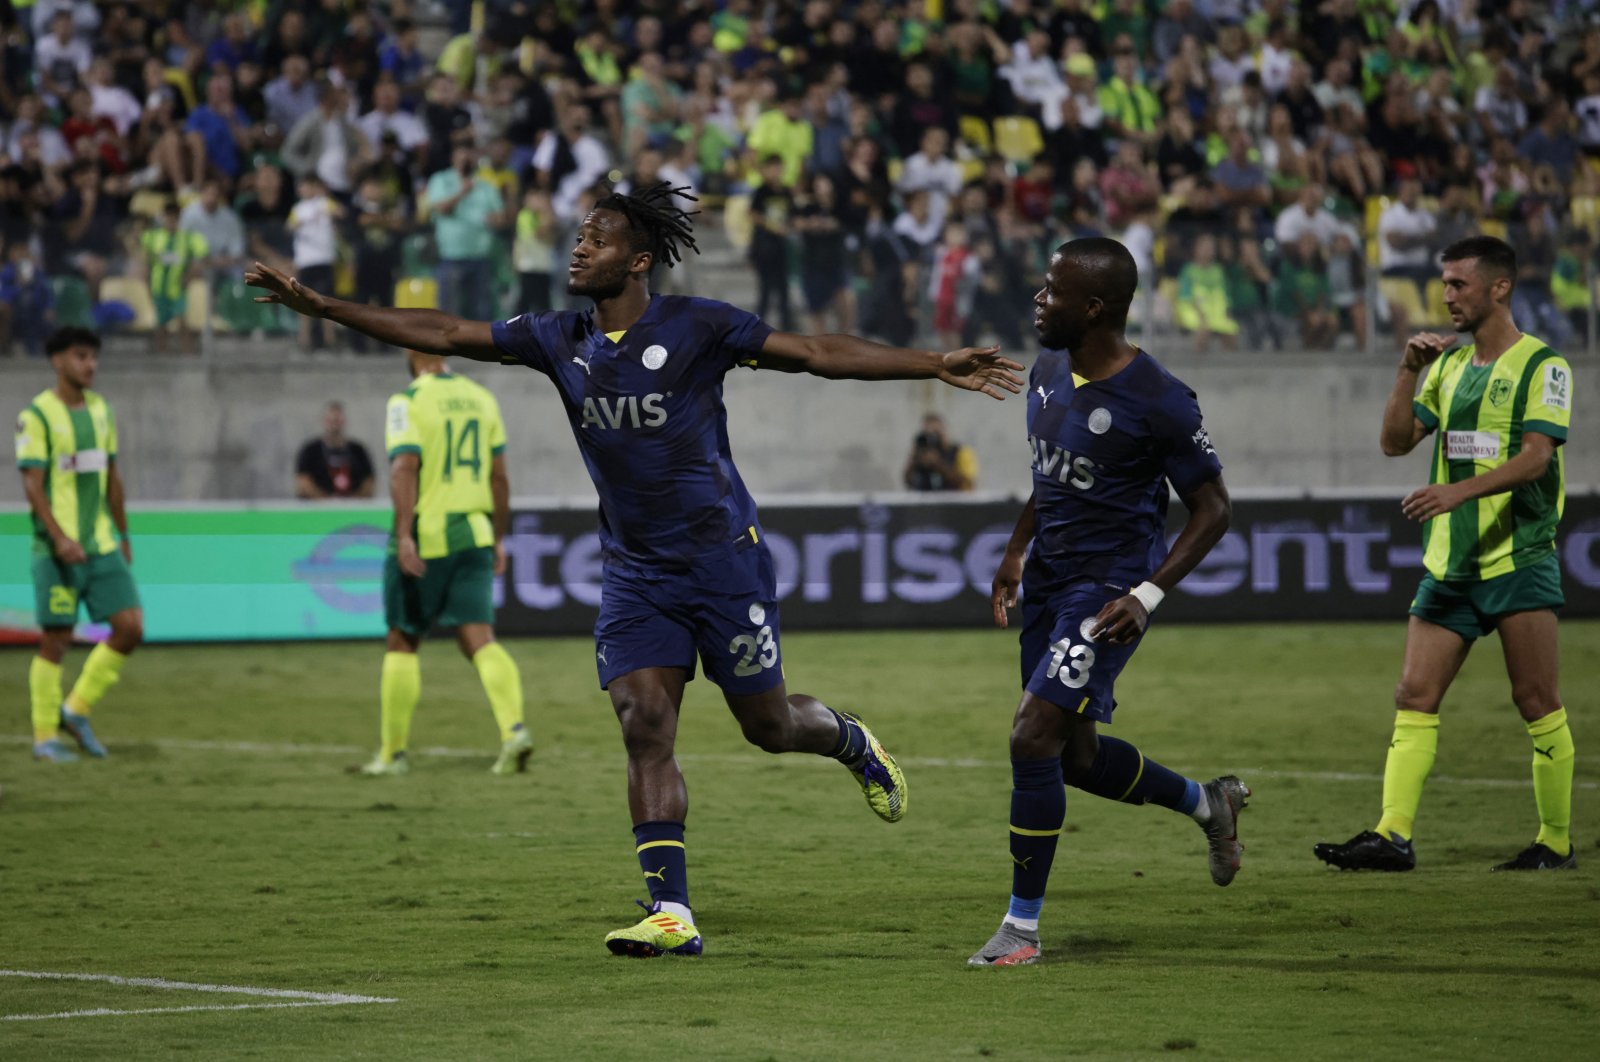 Fenerbahçe&#039;s Michy Batshuayi celebrates scoring his team&#039;s second goal with teammate Enner Valencia in Group B match against AEK Larnaca at AEK Arena, in Larnaca, Greek Cyprus, Oct. 13, 2022. (Reuters Photo)